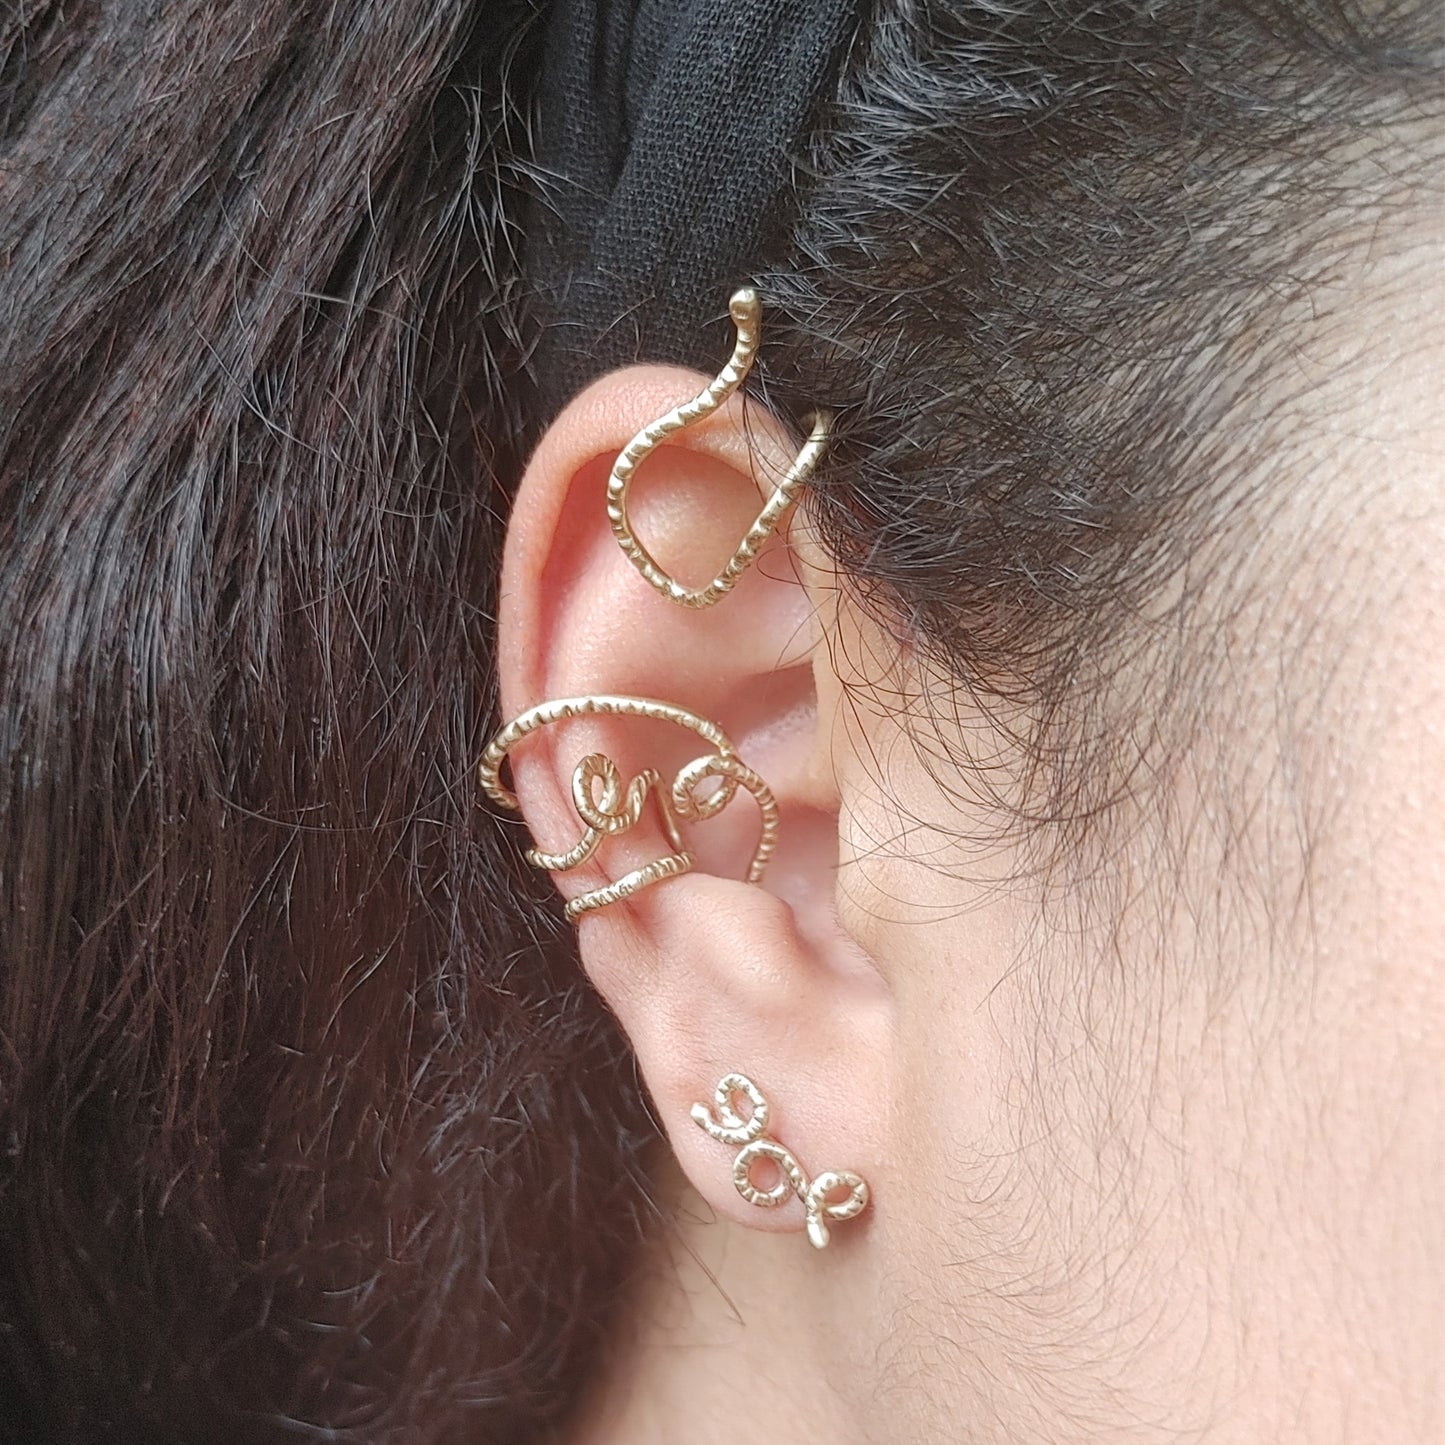 The Youth Partial Ear Cuff